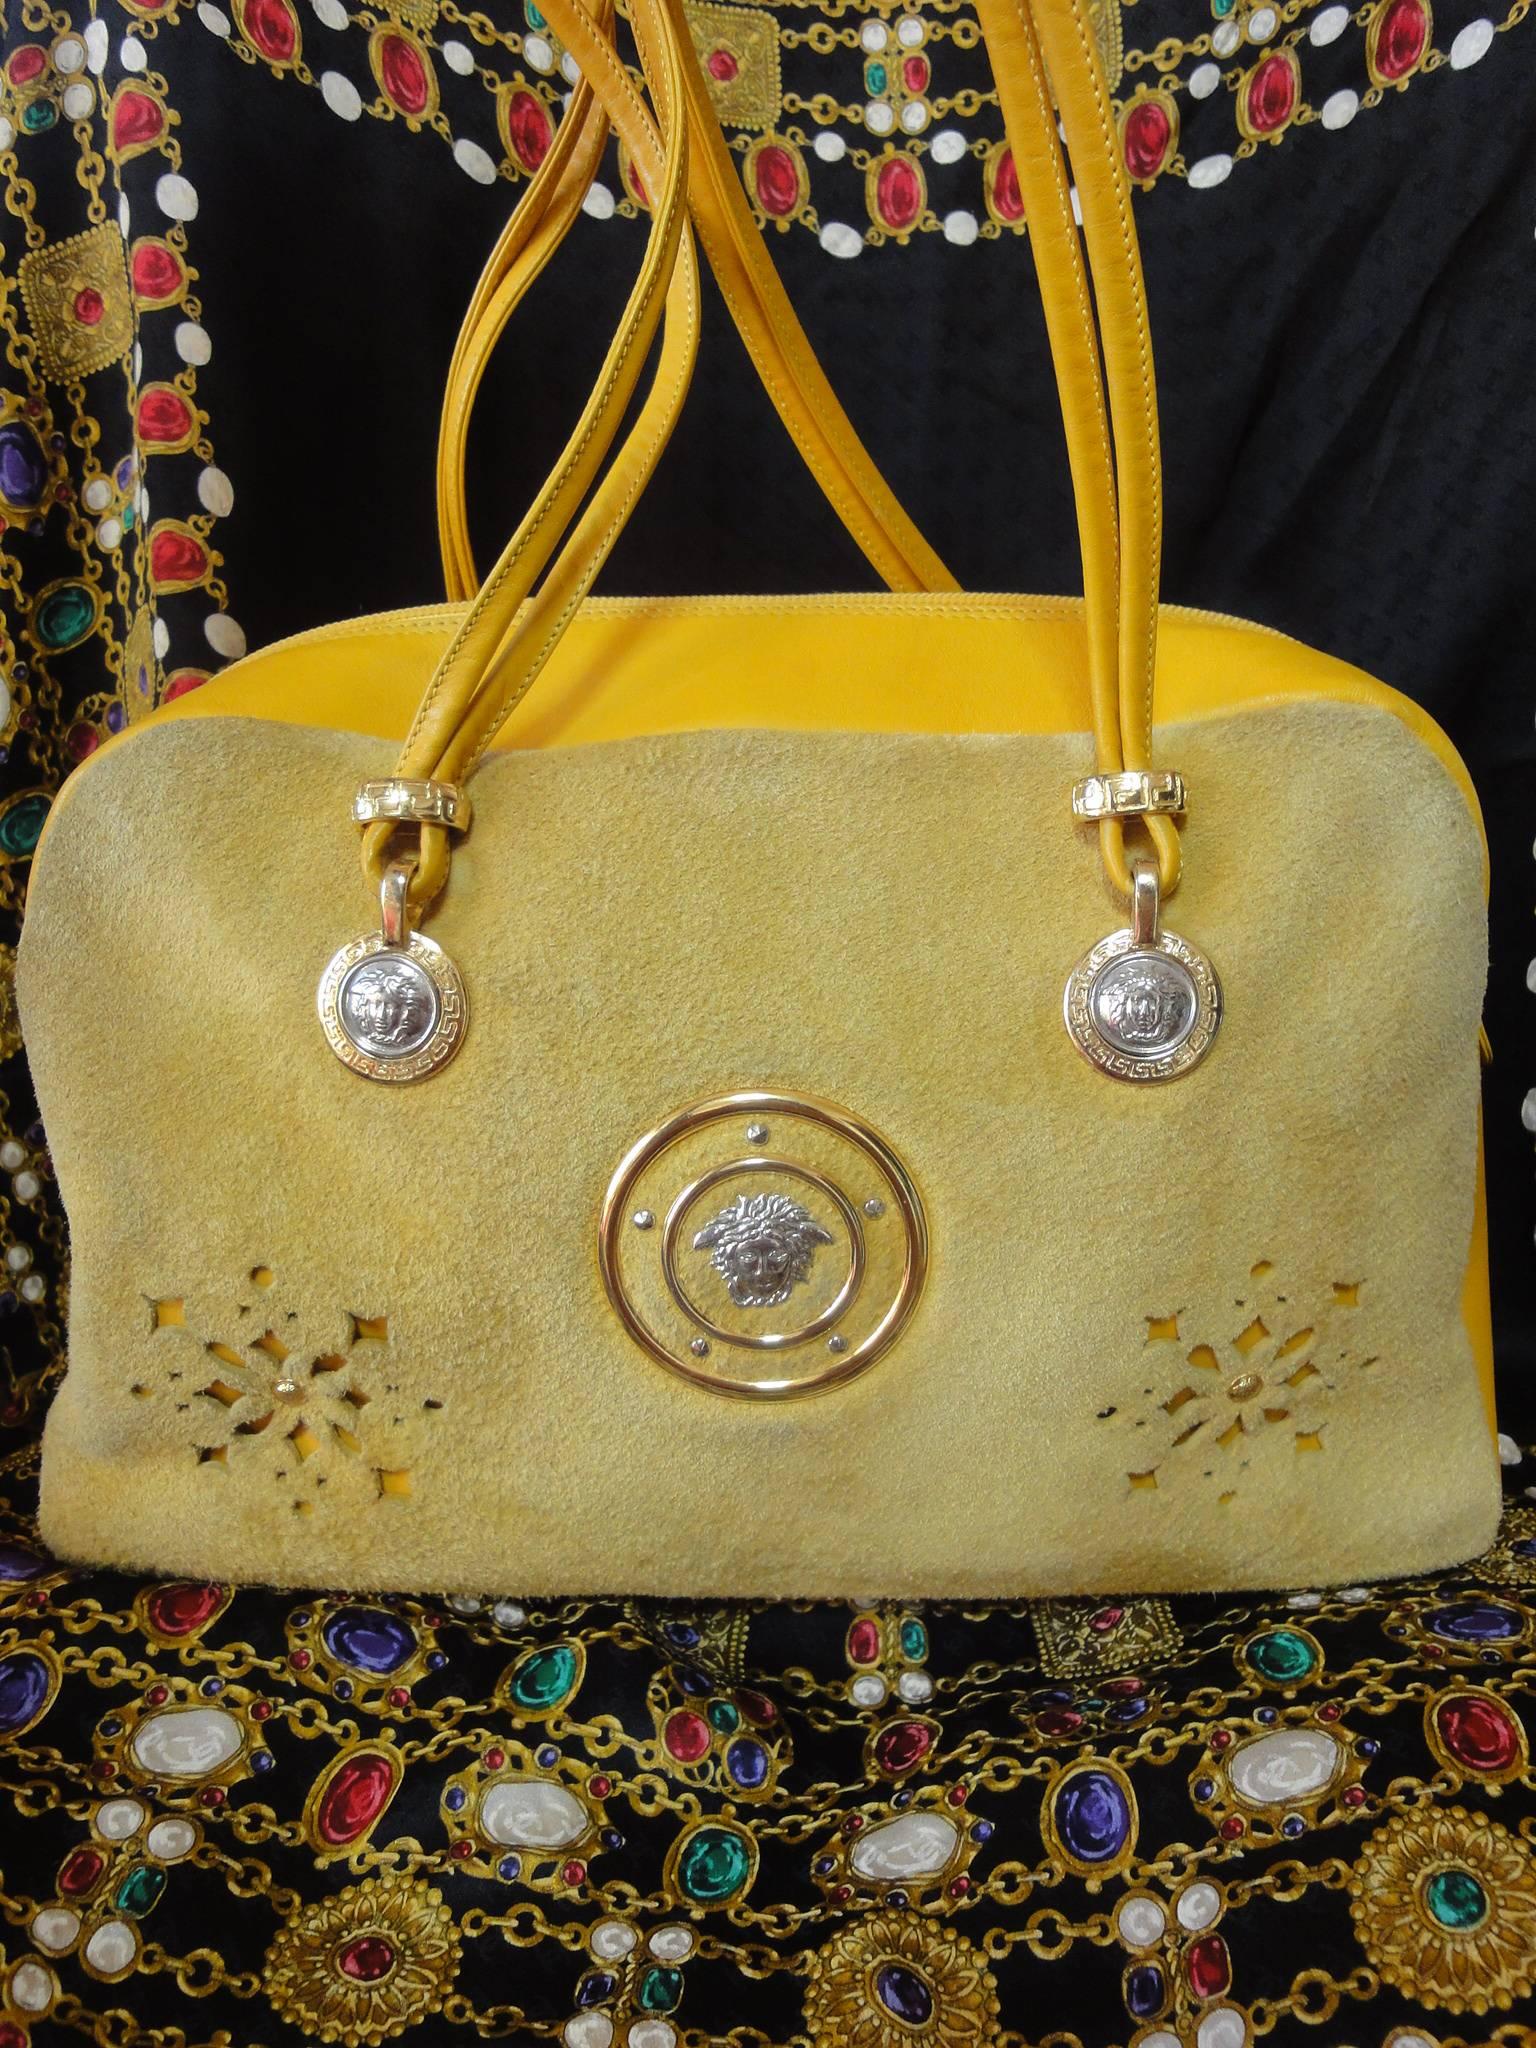 Vintage rare Gianni Versace yellow suede and leather duffle style purse with golden medusa and sunburst charms. Lady Gaga style.

This is a rare vintage duffle style purse in yellow suede and smooth genuine leather combi from GIANNI VERSACE.